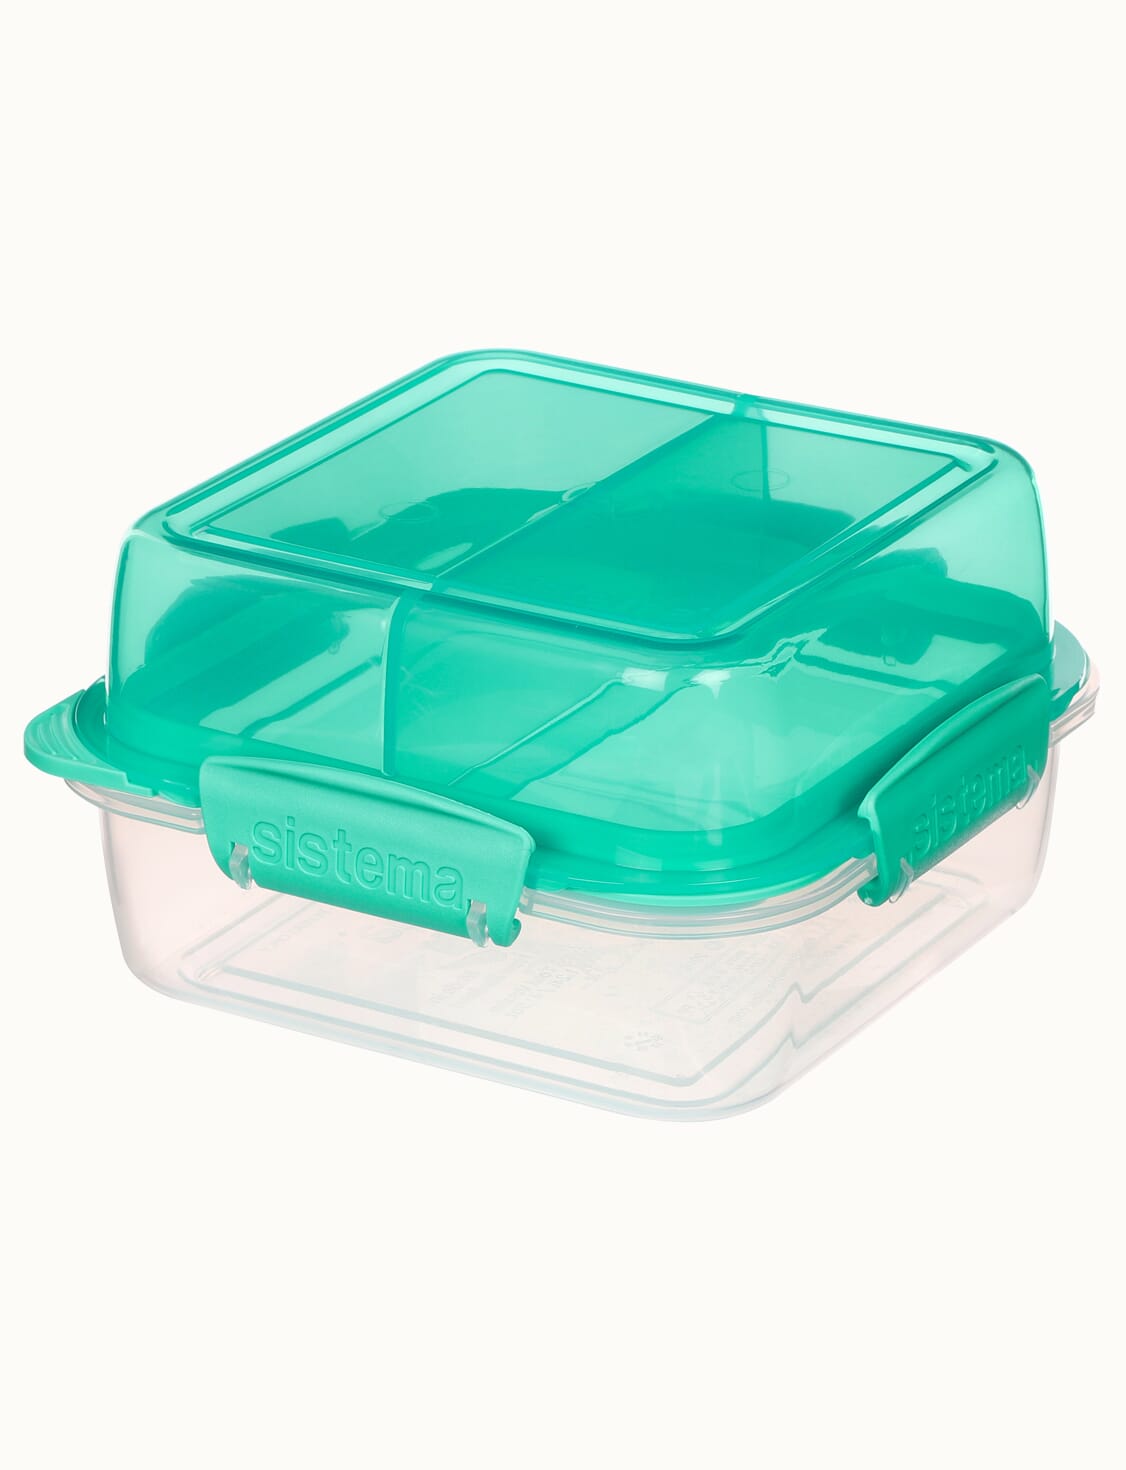 https://stergita.sirv.com/sistema/catalog/product/2/1/21610_lunchstacksquare_togo_angle_nolabel_mintyteal.png?canvas.color=fcfbf8